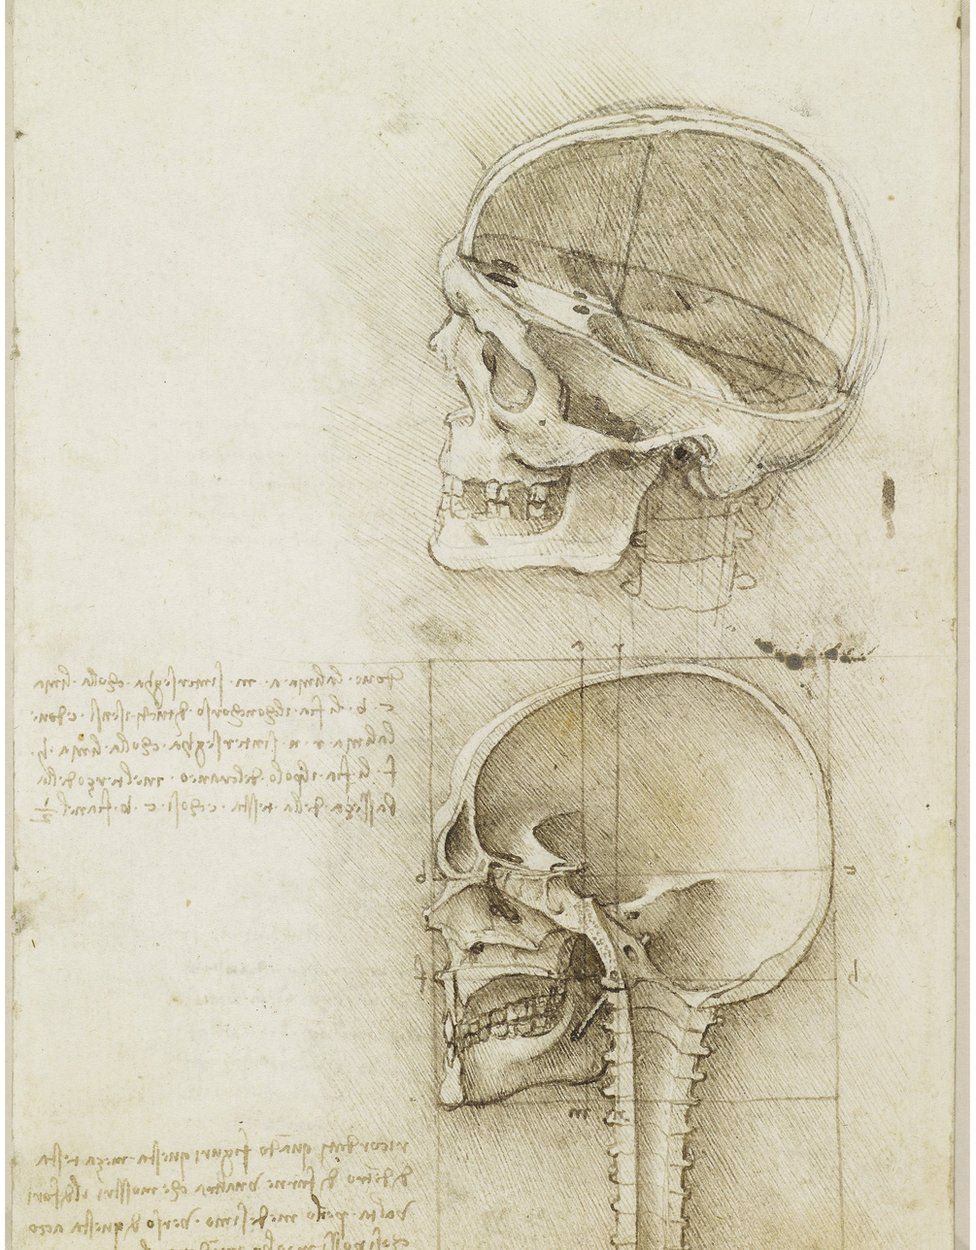 Sketches of a skull